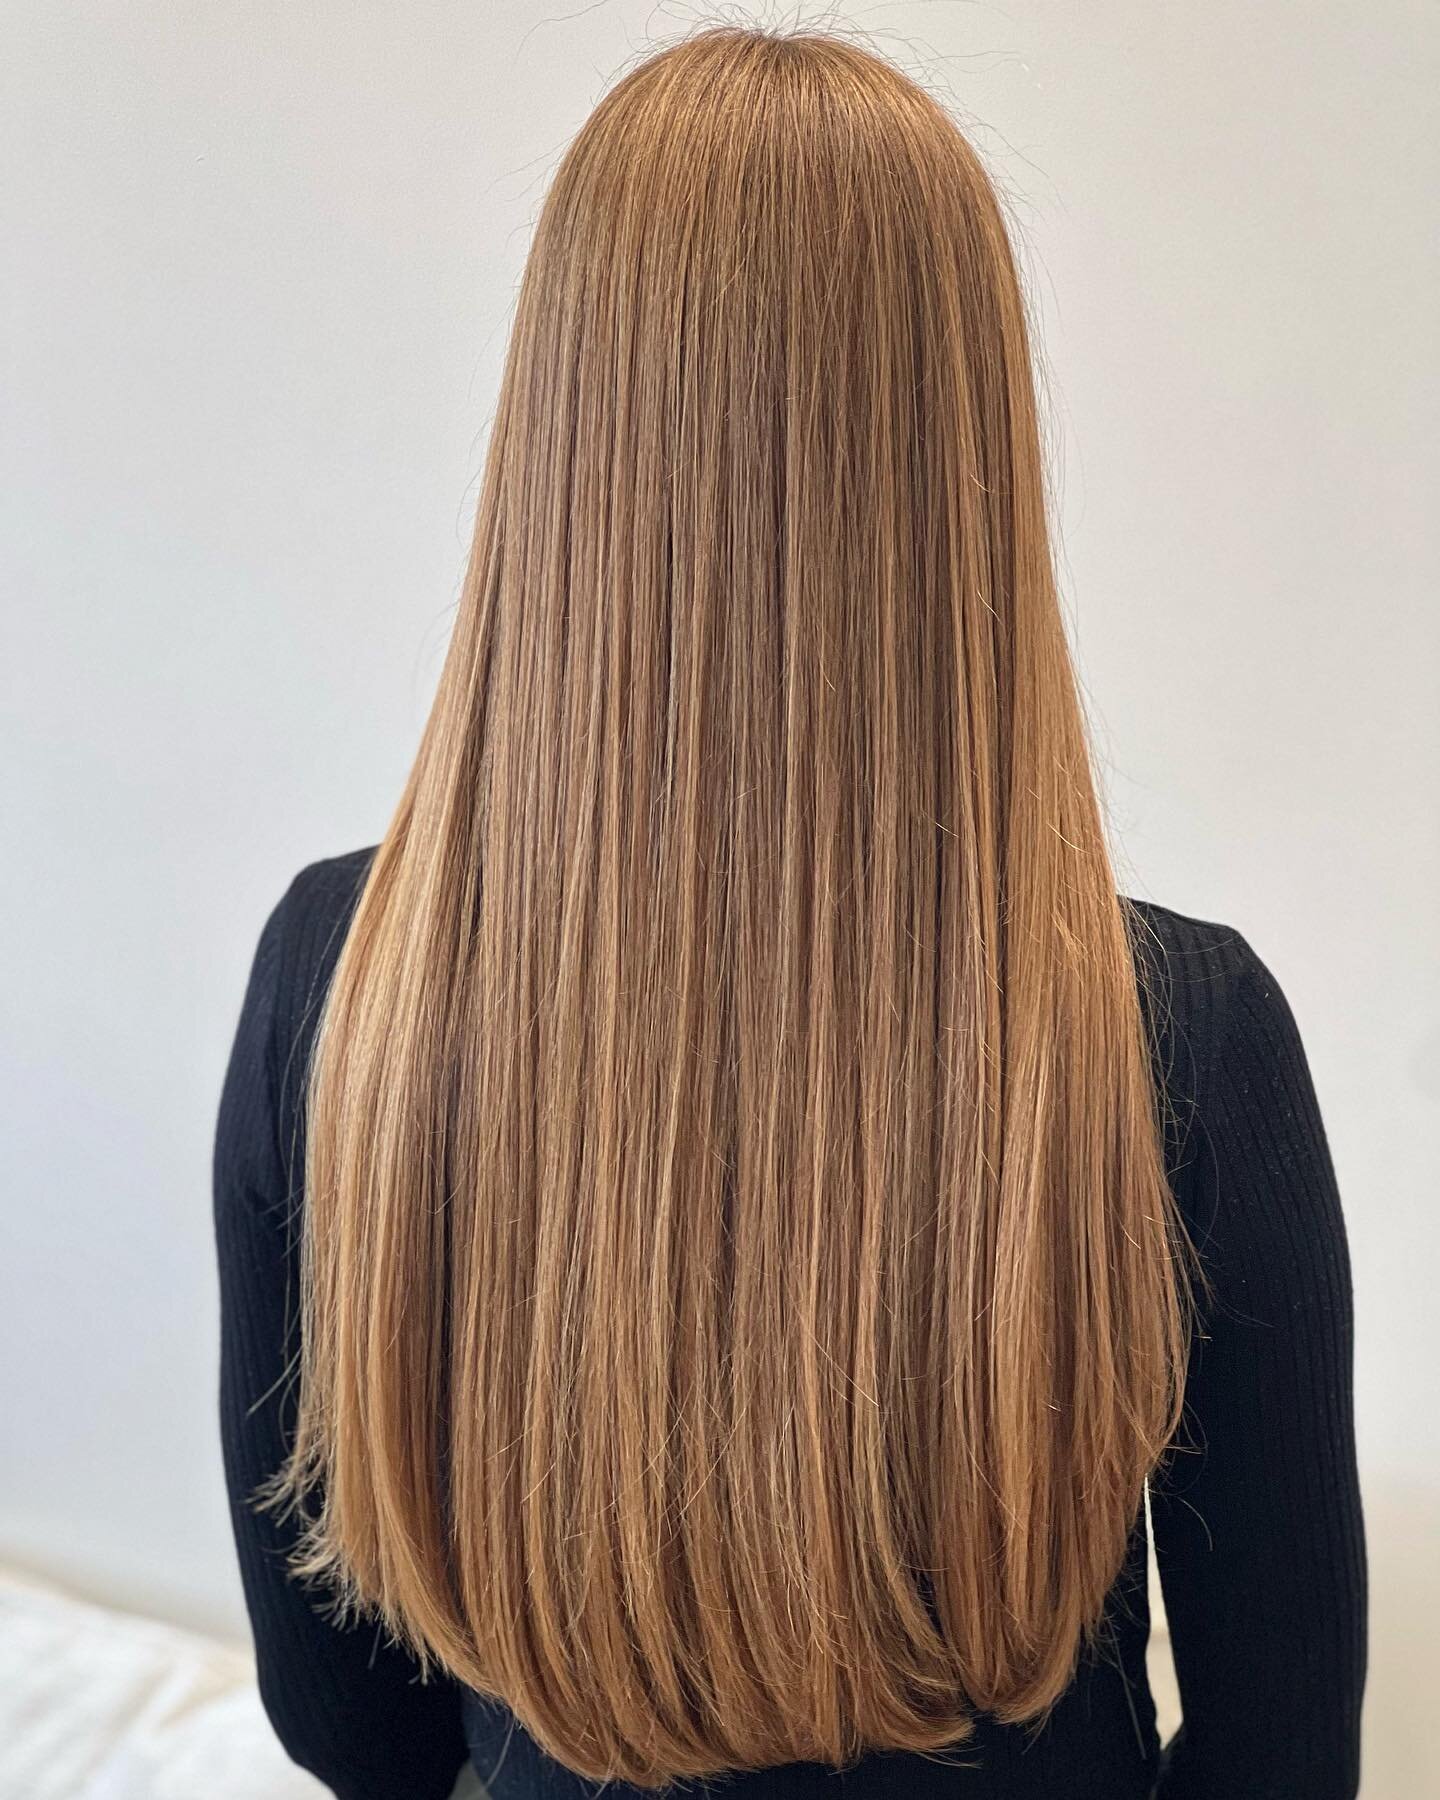 Summer hair, don't care! Embrace the sunshine and let us take care of your hair. Our expert stylists will help you achieve the perfect summer look that will last all season long. Book now and let's make your hair the ultimate accessory this summer. C